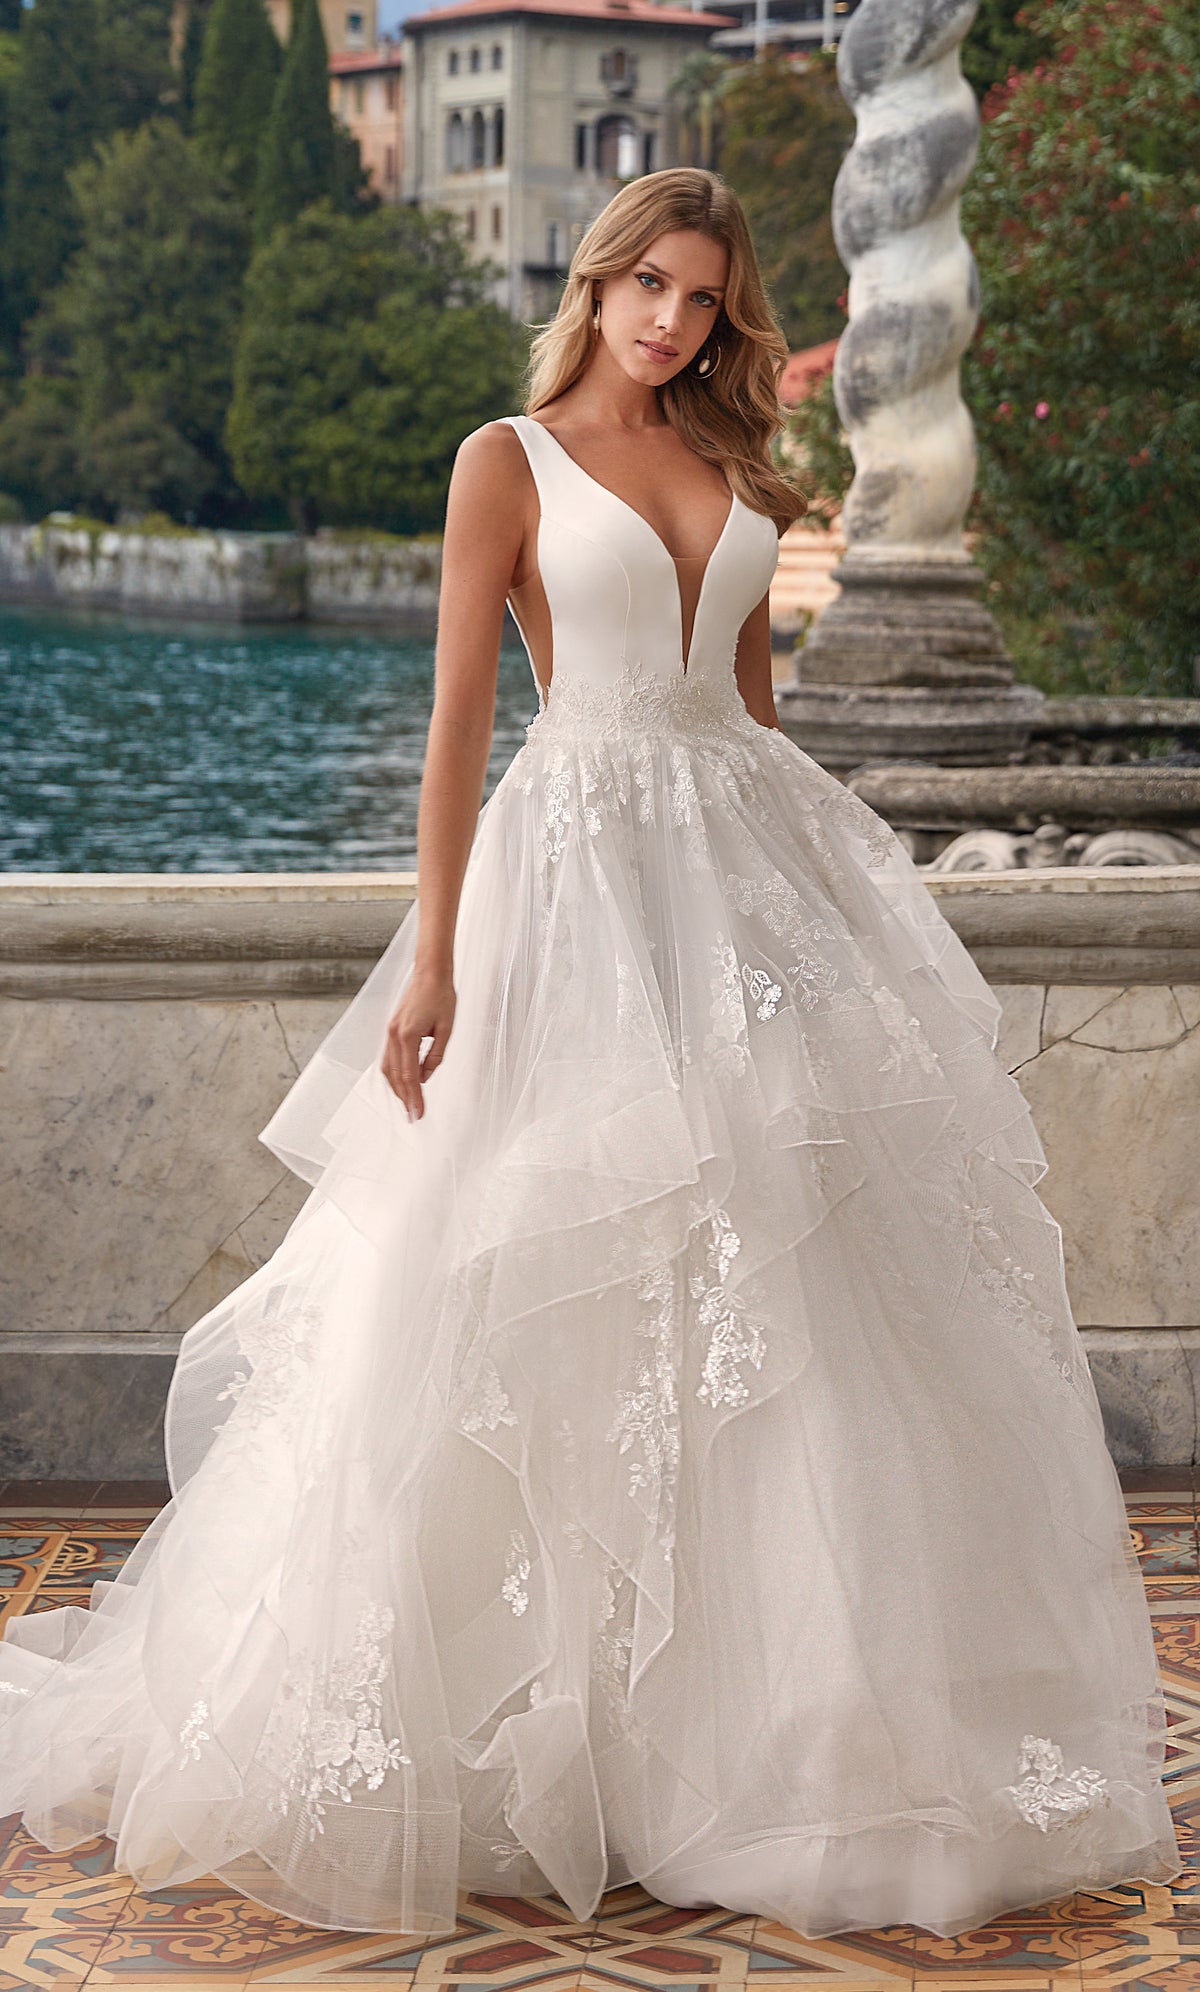 Formal Dress: 7040. Long Bridal Gown, Plunging Neckline, Ball Gown